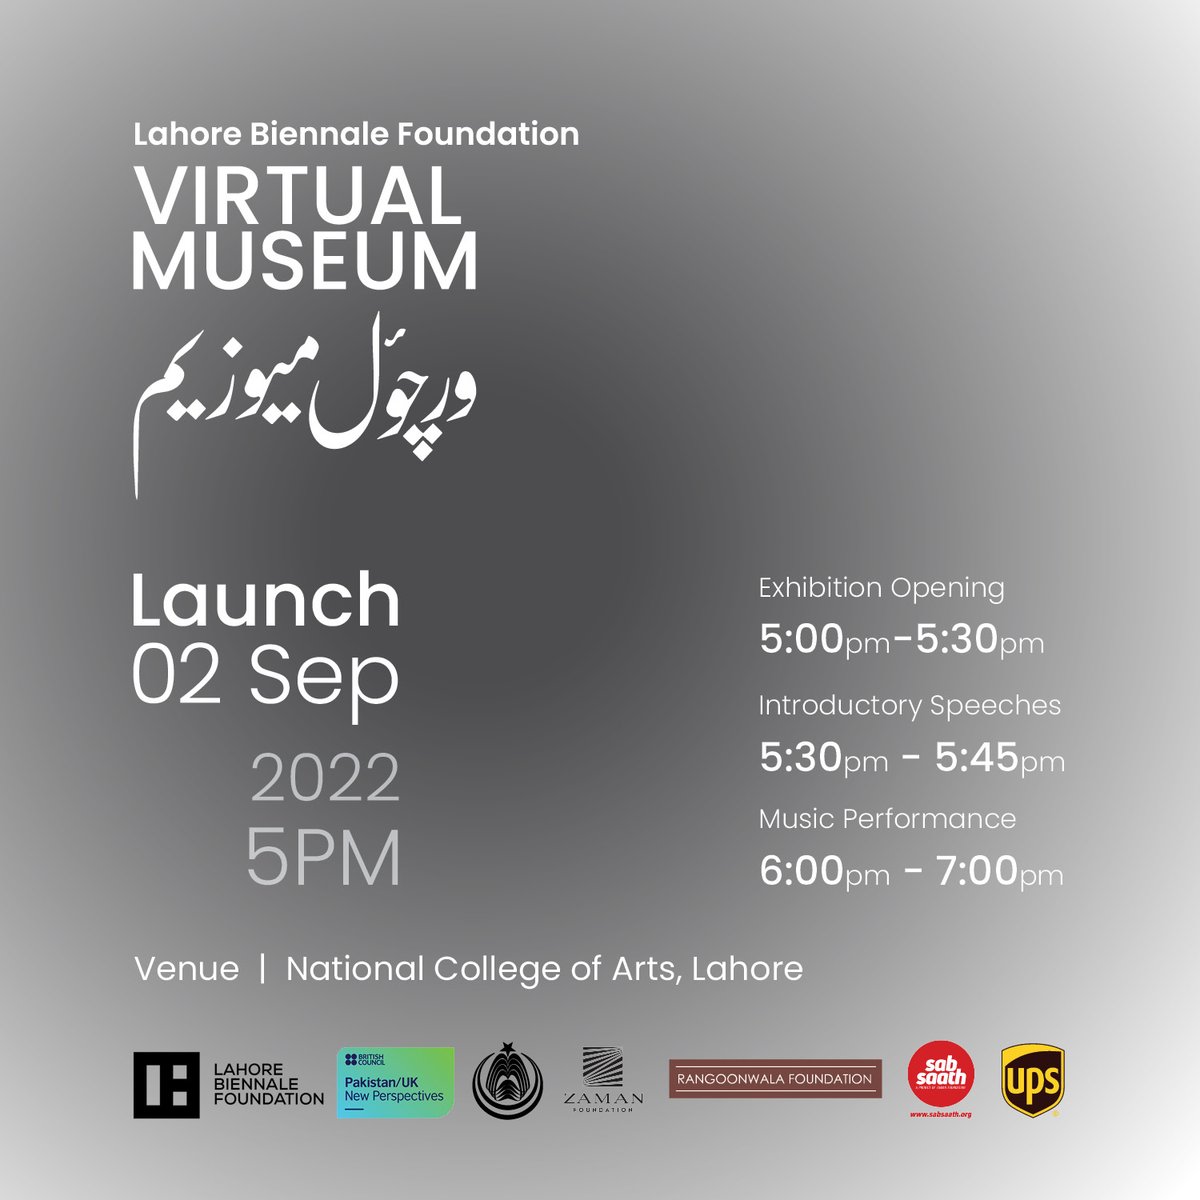 Join us today, 2nd September 2022, at the National College of Arts, Lahore, for the launch of the LBF Virtual Museum. @pkBritish @QudsiaRahim #LahoreBiennaleFoundation #PKUKCelebrating75 #LBFVM #LBF #lbfvirtualmuseum #Lahore #Pakistan #art #virtualmuseum